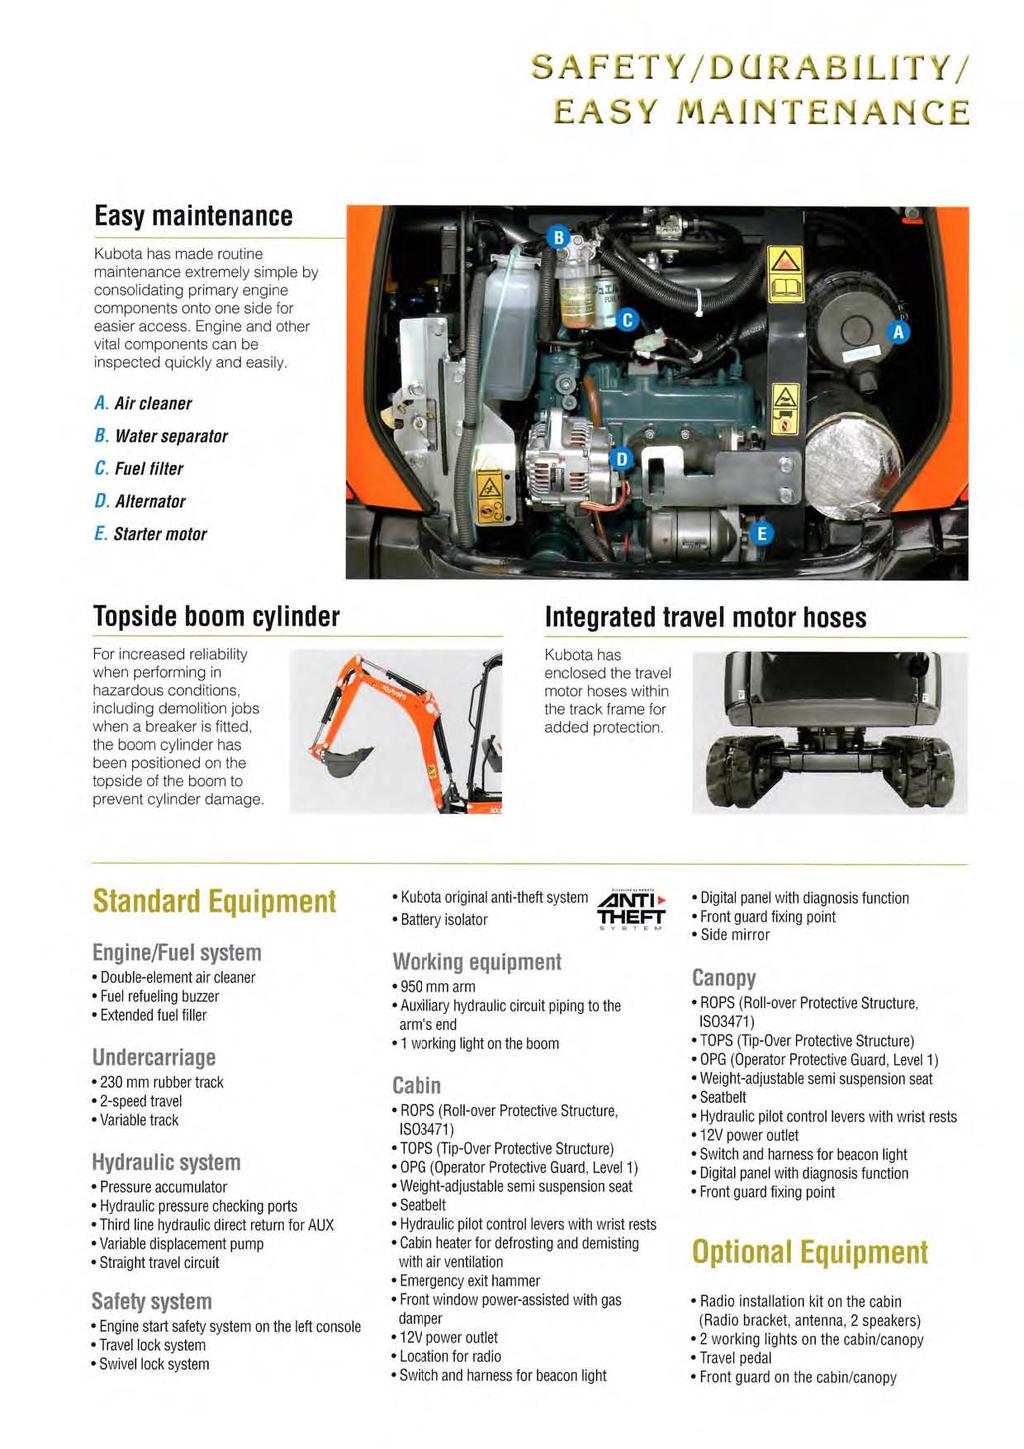 SAFETY / DURABiUTY / EASY MAINTENANCE Easy maintenance Kubola has made routine maintenance extremely simple by consolidating primary engine components onto one side for easier access.